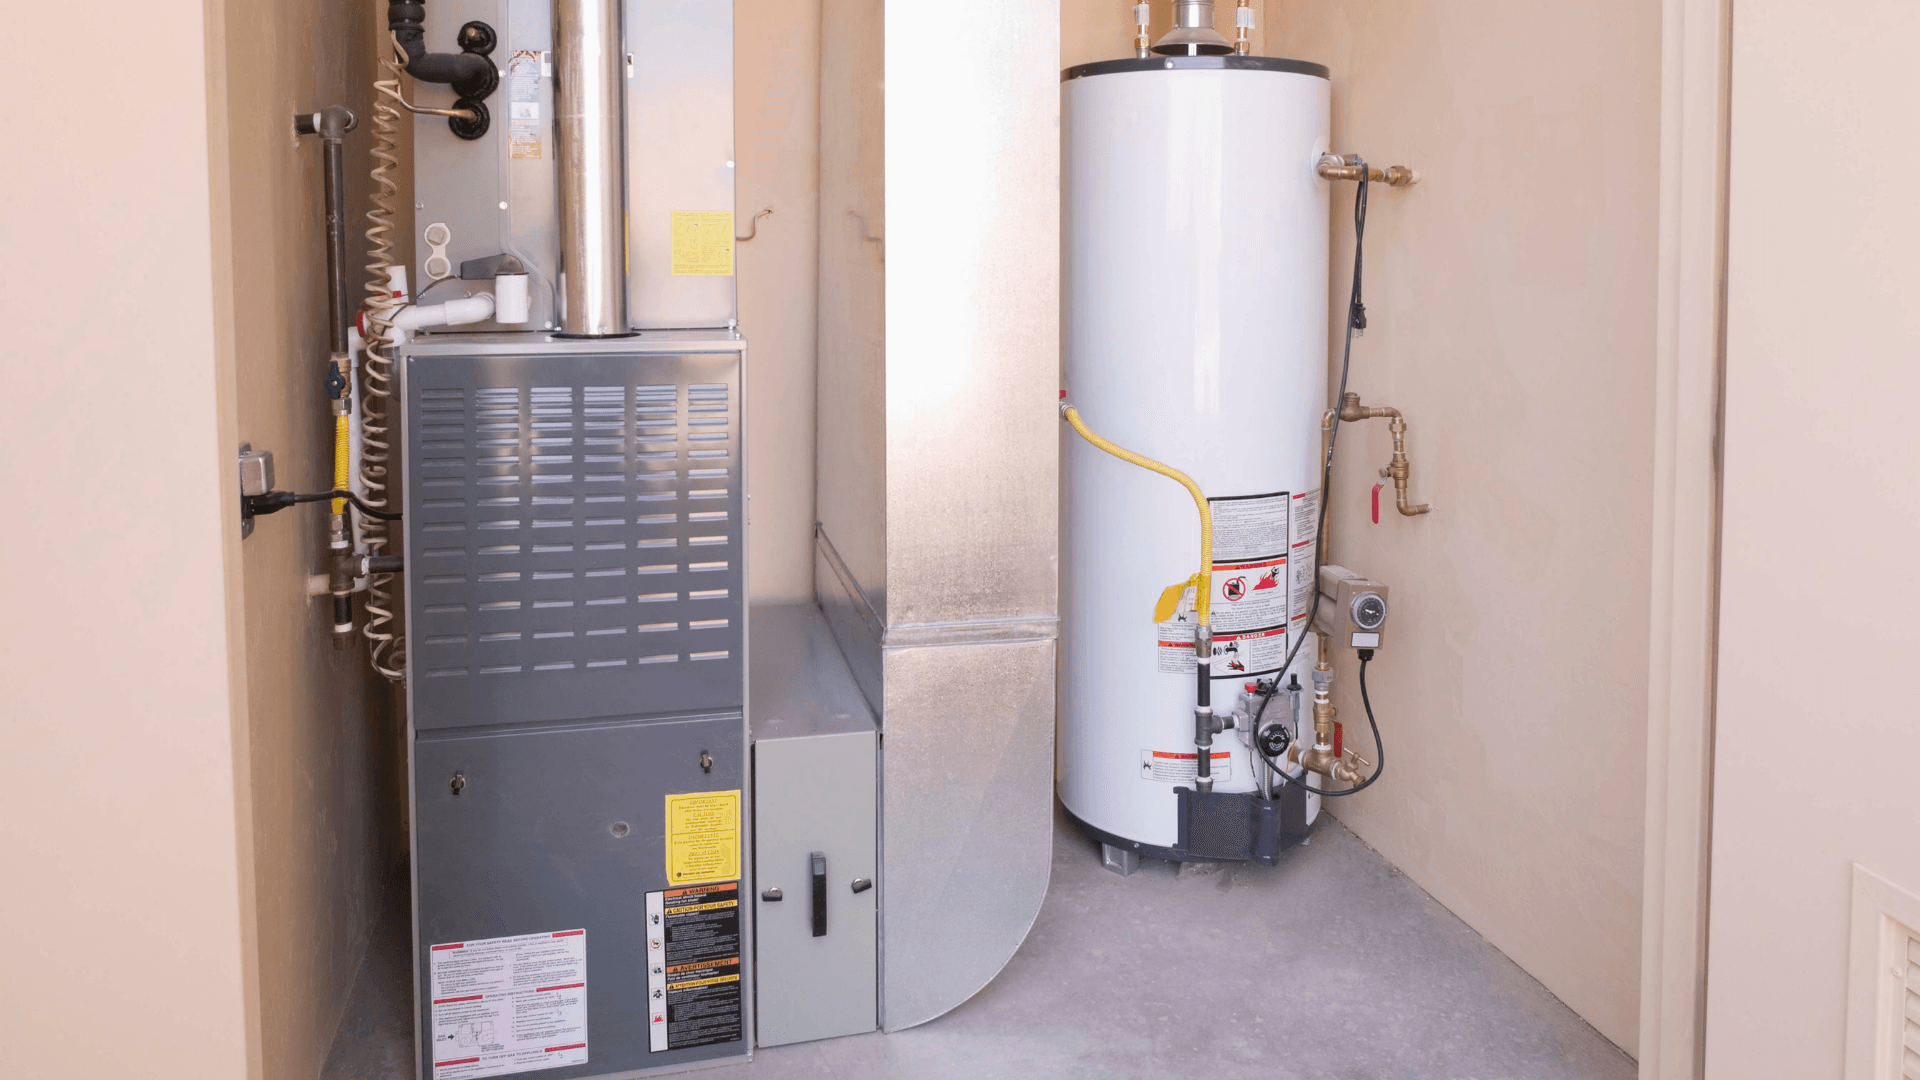 Picture of a furnace and water heater in a utility room.